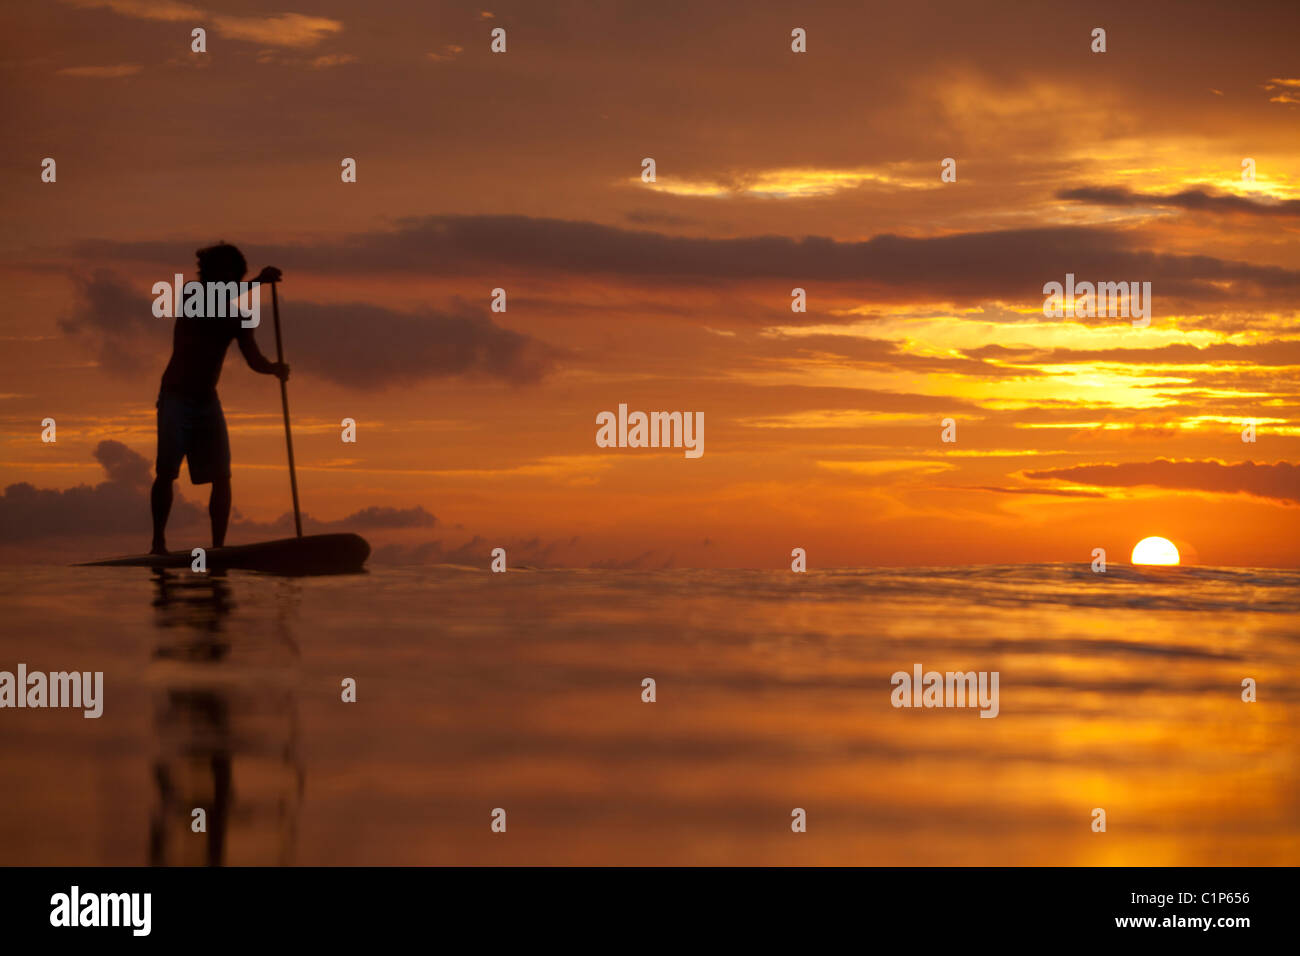 A stand-up paddler paddles in Kailua Bay  during a gorgeous sunrise on the island of Oahu, Hawaii. Stock Photo